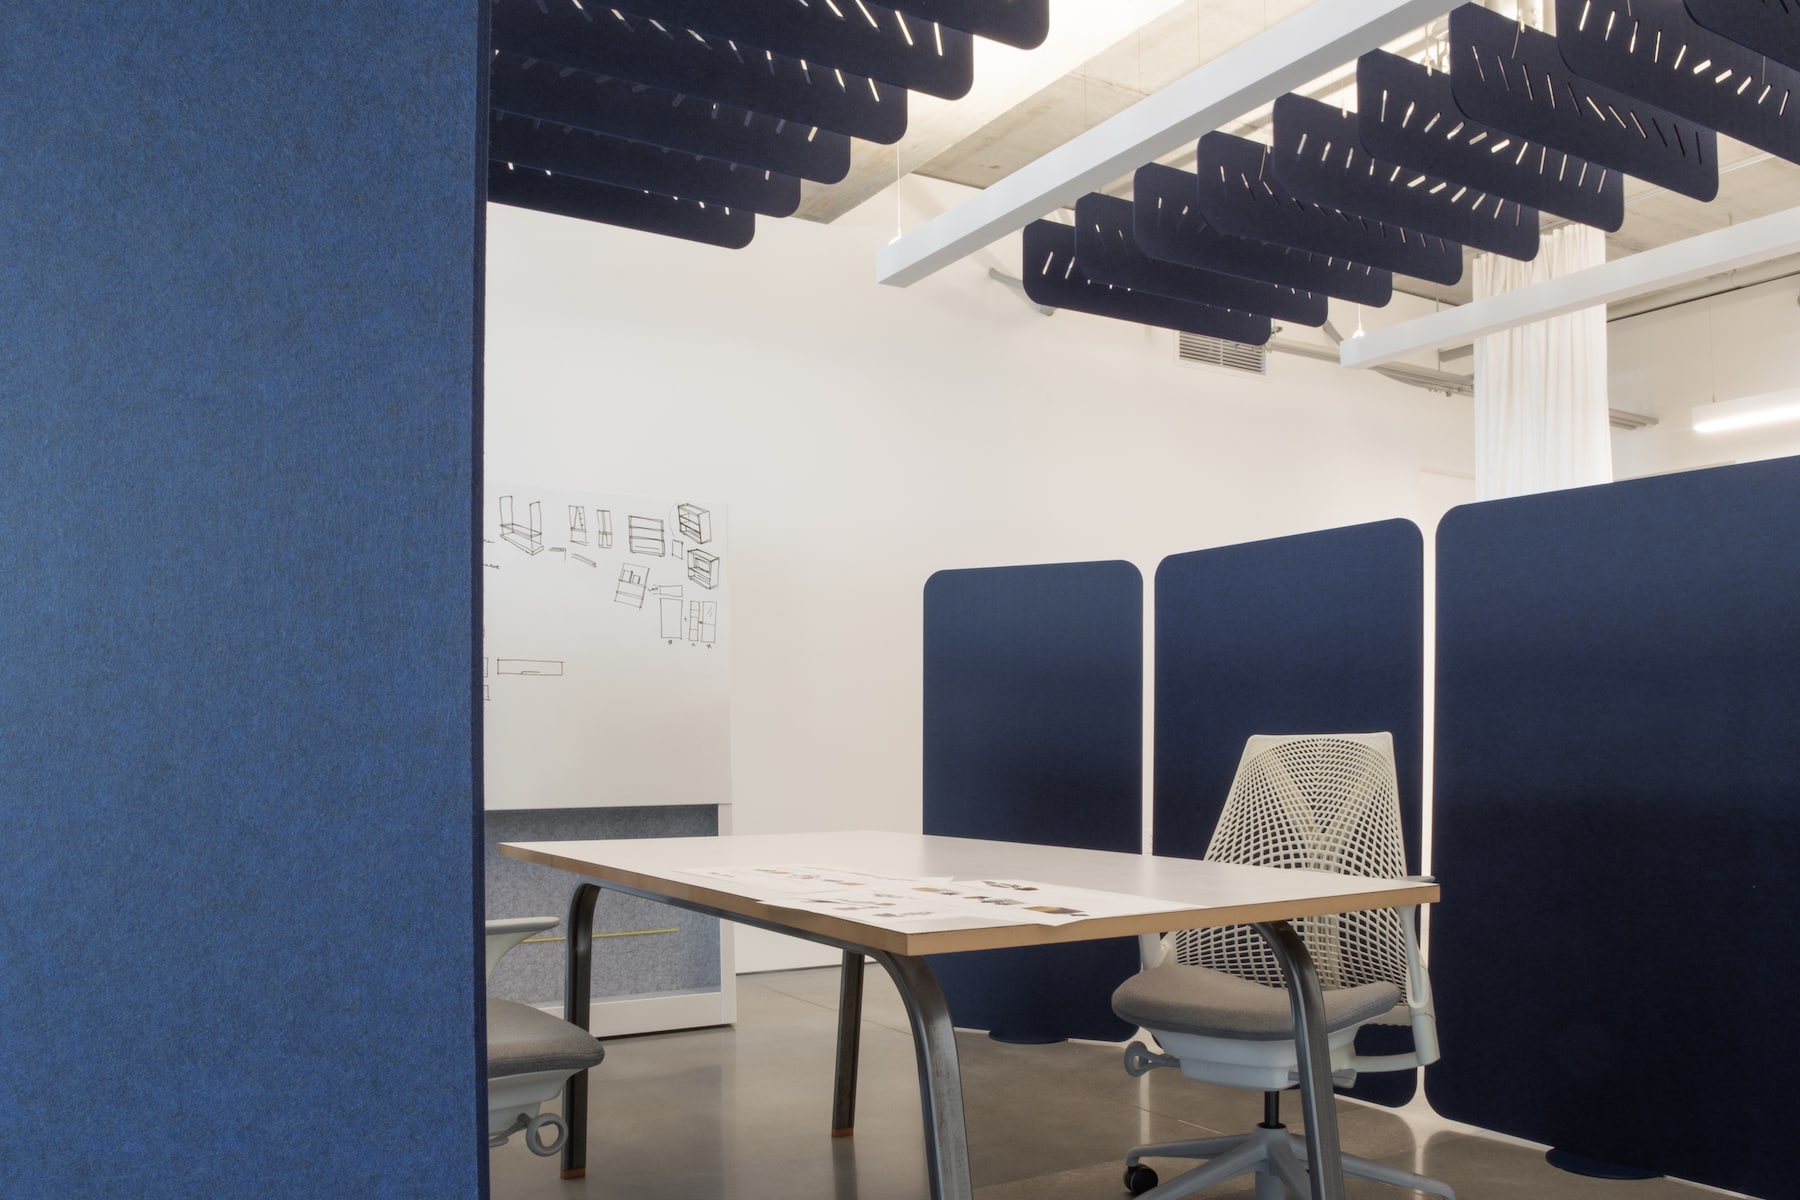 Buffer soundproof walls and sky ceiling panels in office